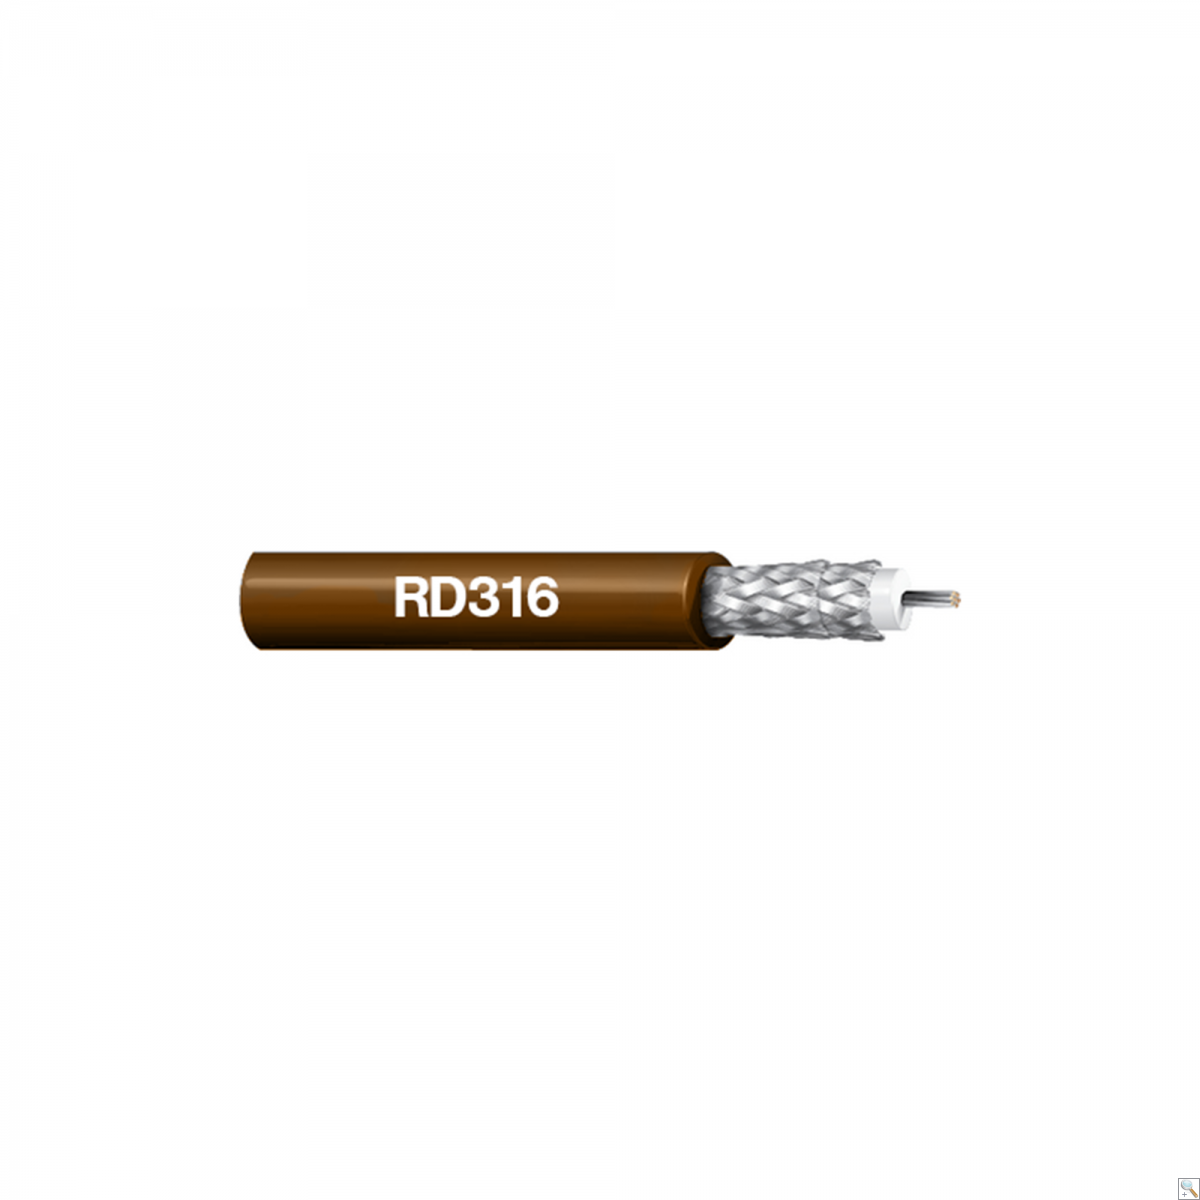 RD316 - Cut Lenghts